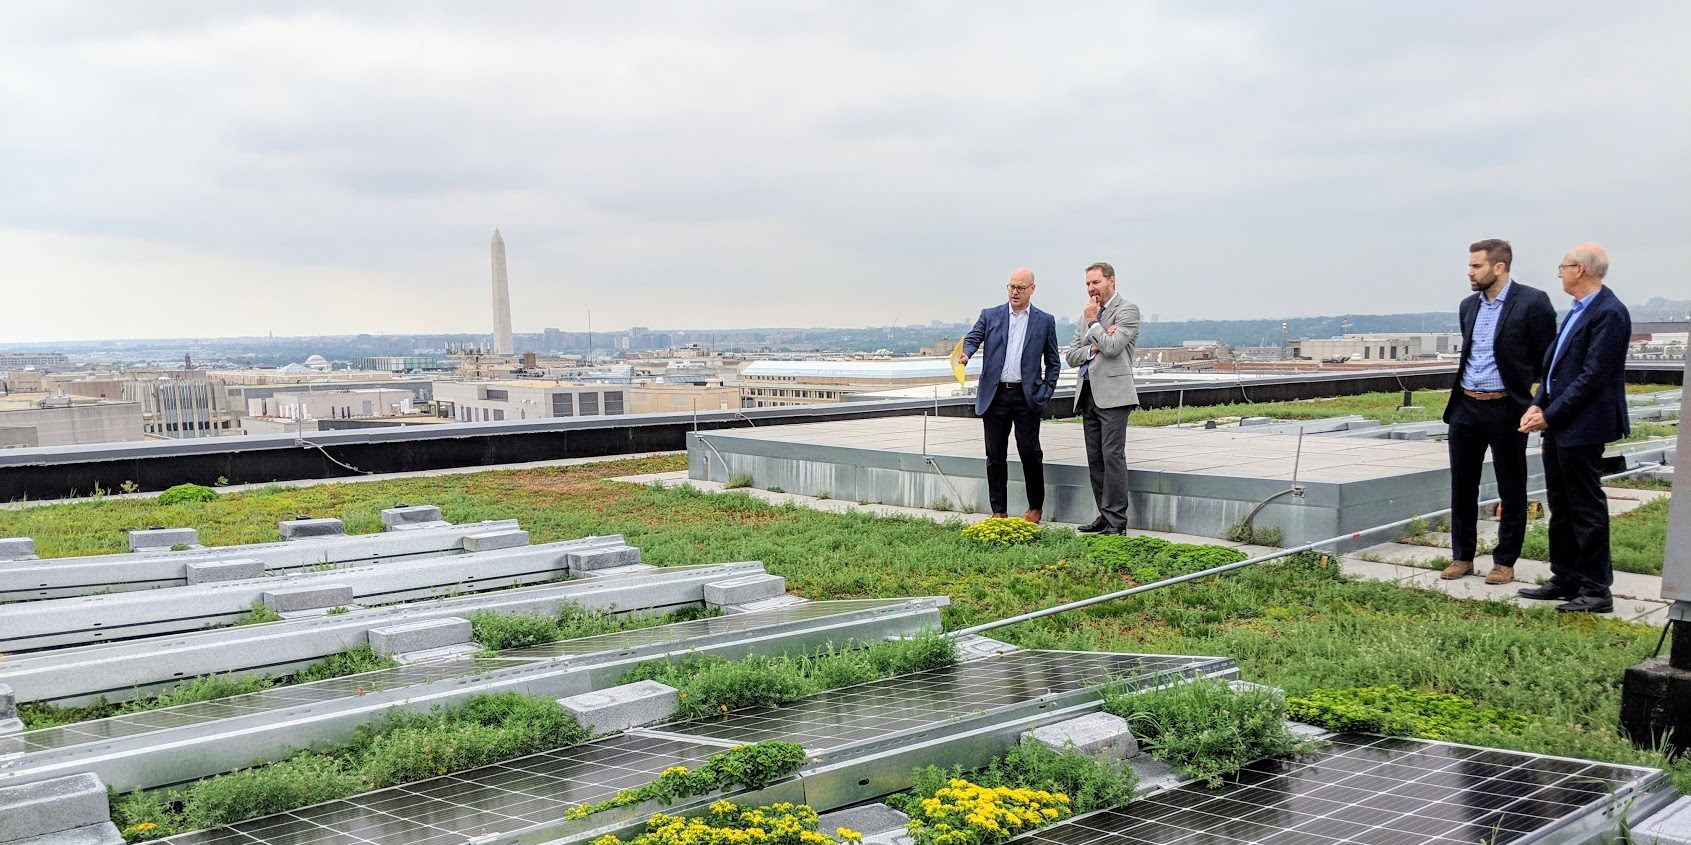 Four people are standing in groups of two on a rooftop covered in greenery and solar panels. The rooftop overlooks a city and a tower is in the back. The sky is overcast.